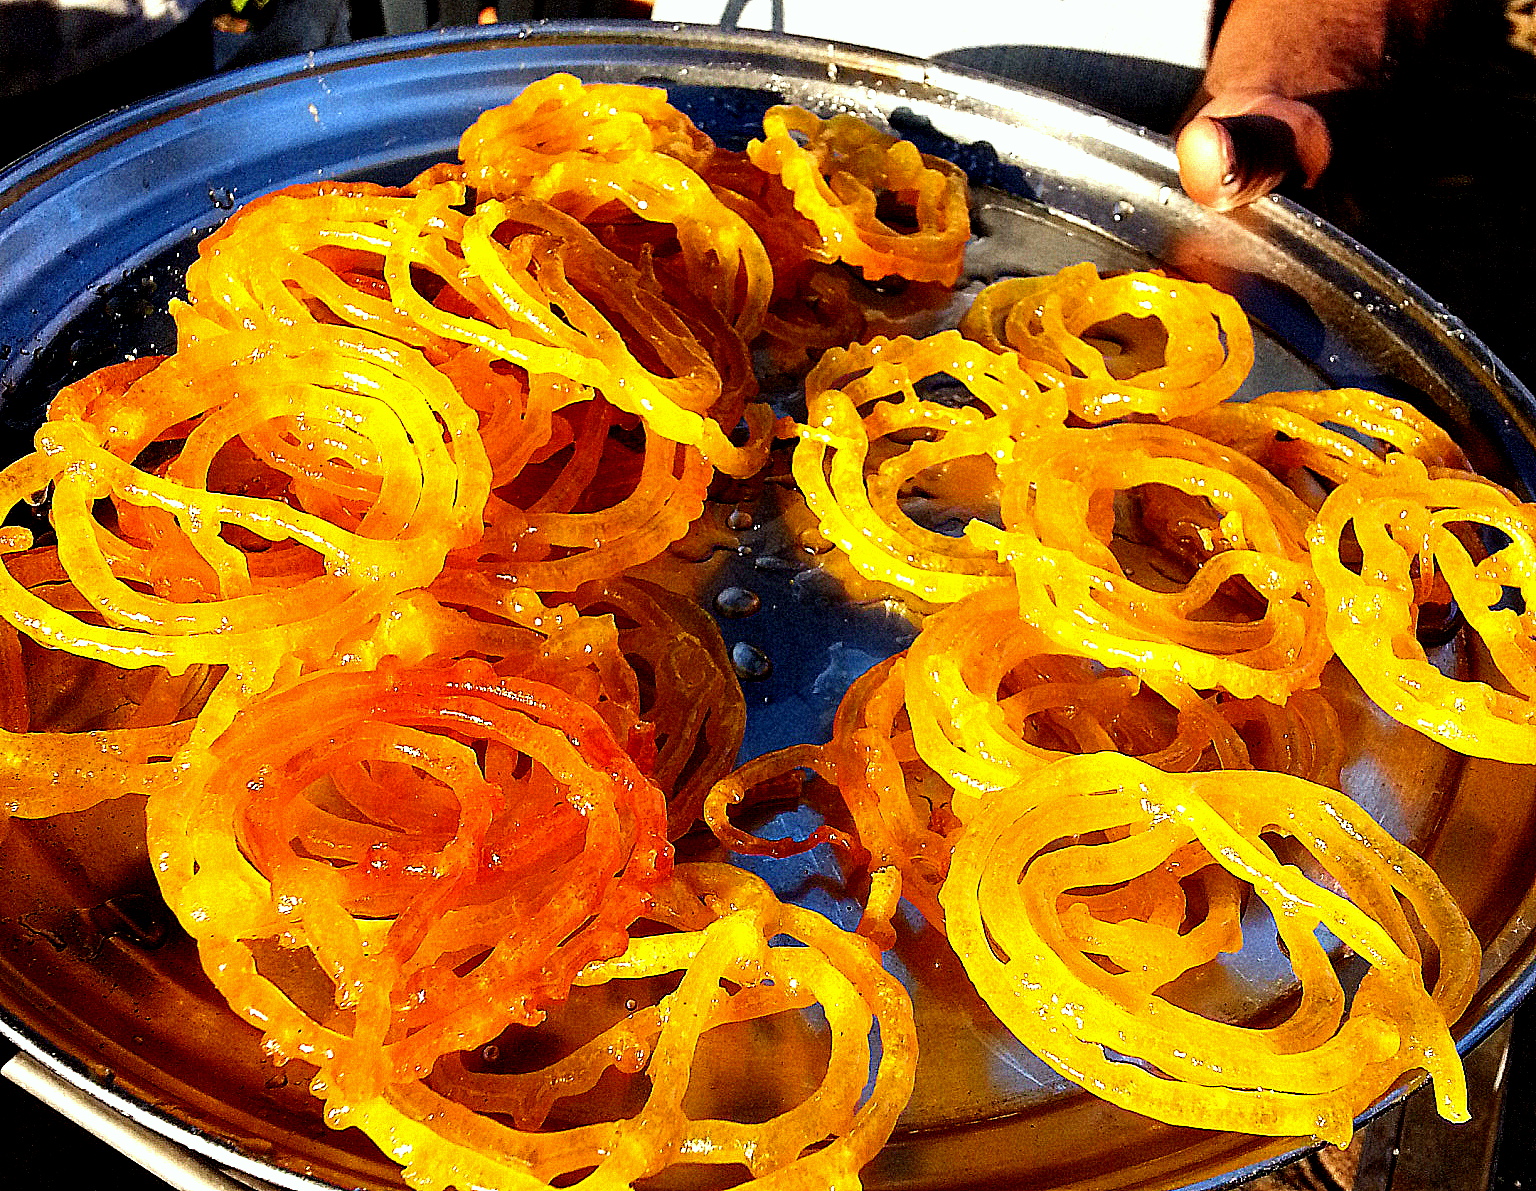 Rs 20 for two jalebis fried in pure ghee. Expensive? Who cares when they taste so good! image source: Dipankar Paul/Folomojo